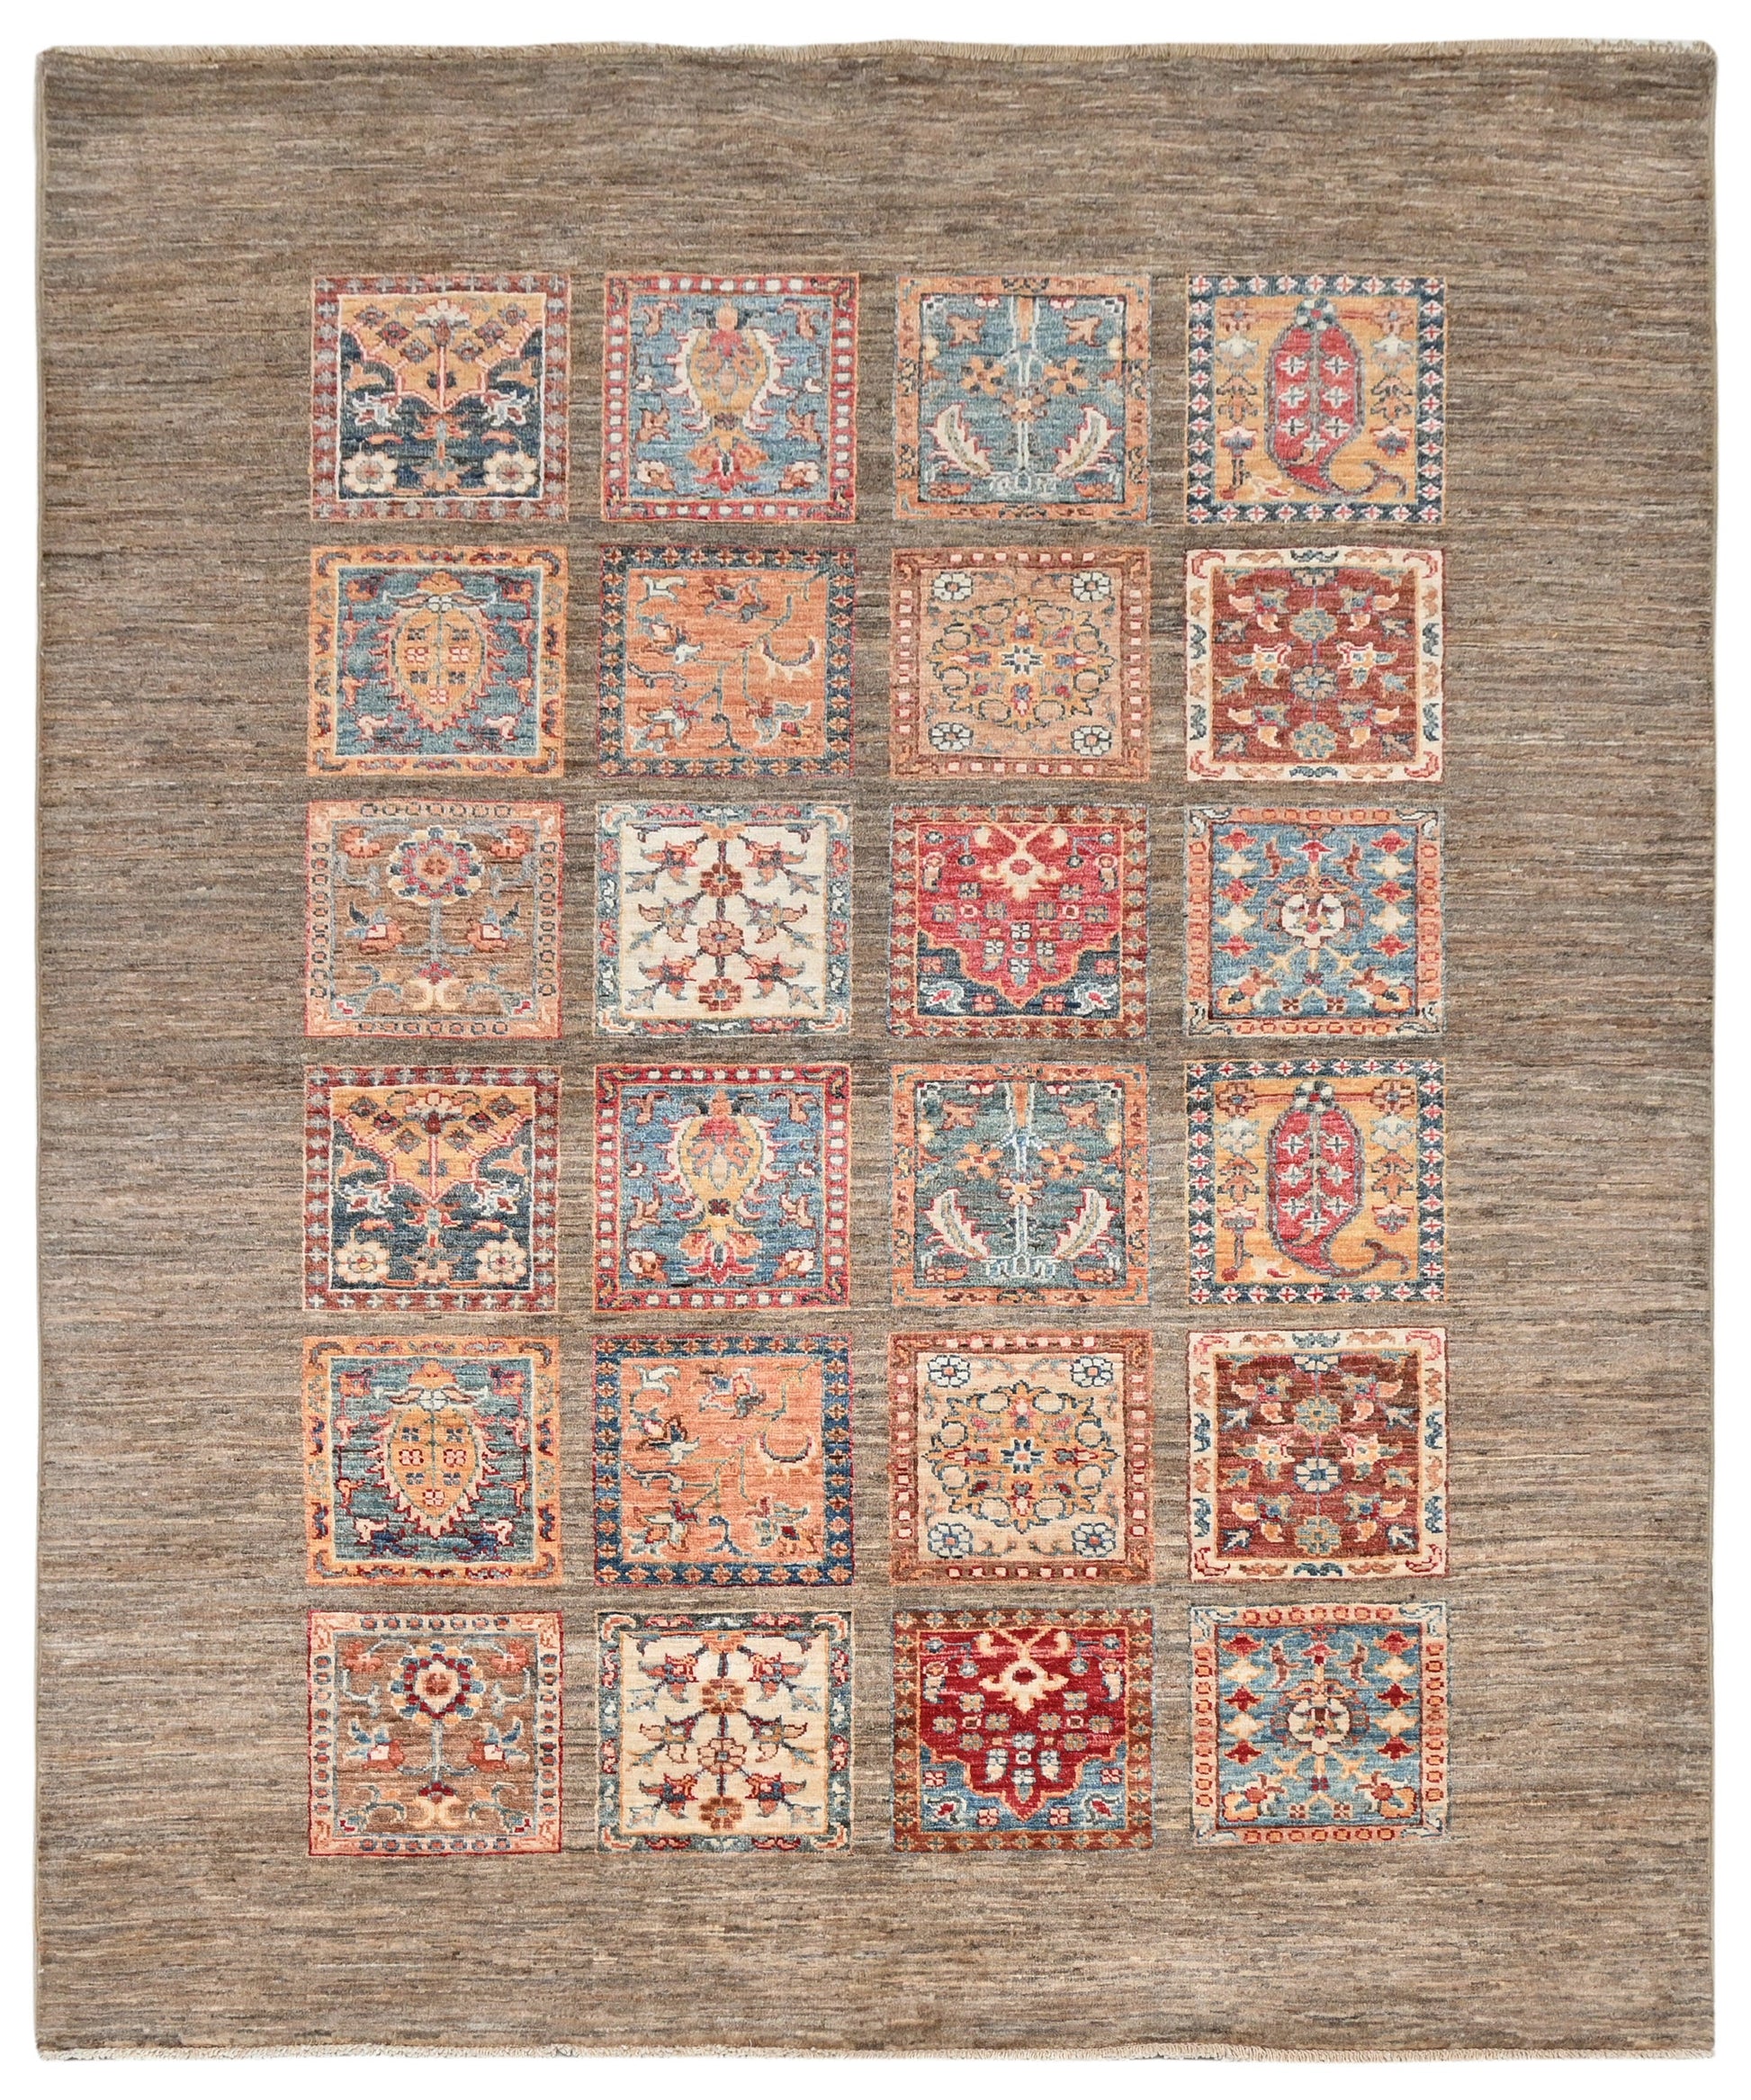 Four Gardens of Paradise Rug | 6'8" x 5' | Home Decor | Hand-Knotted Rug